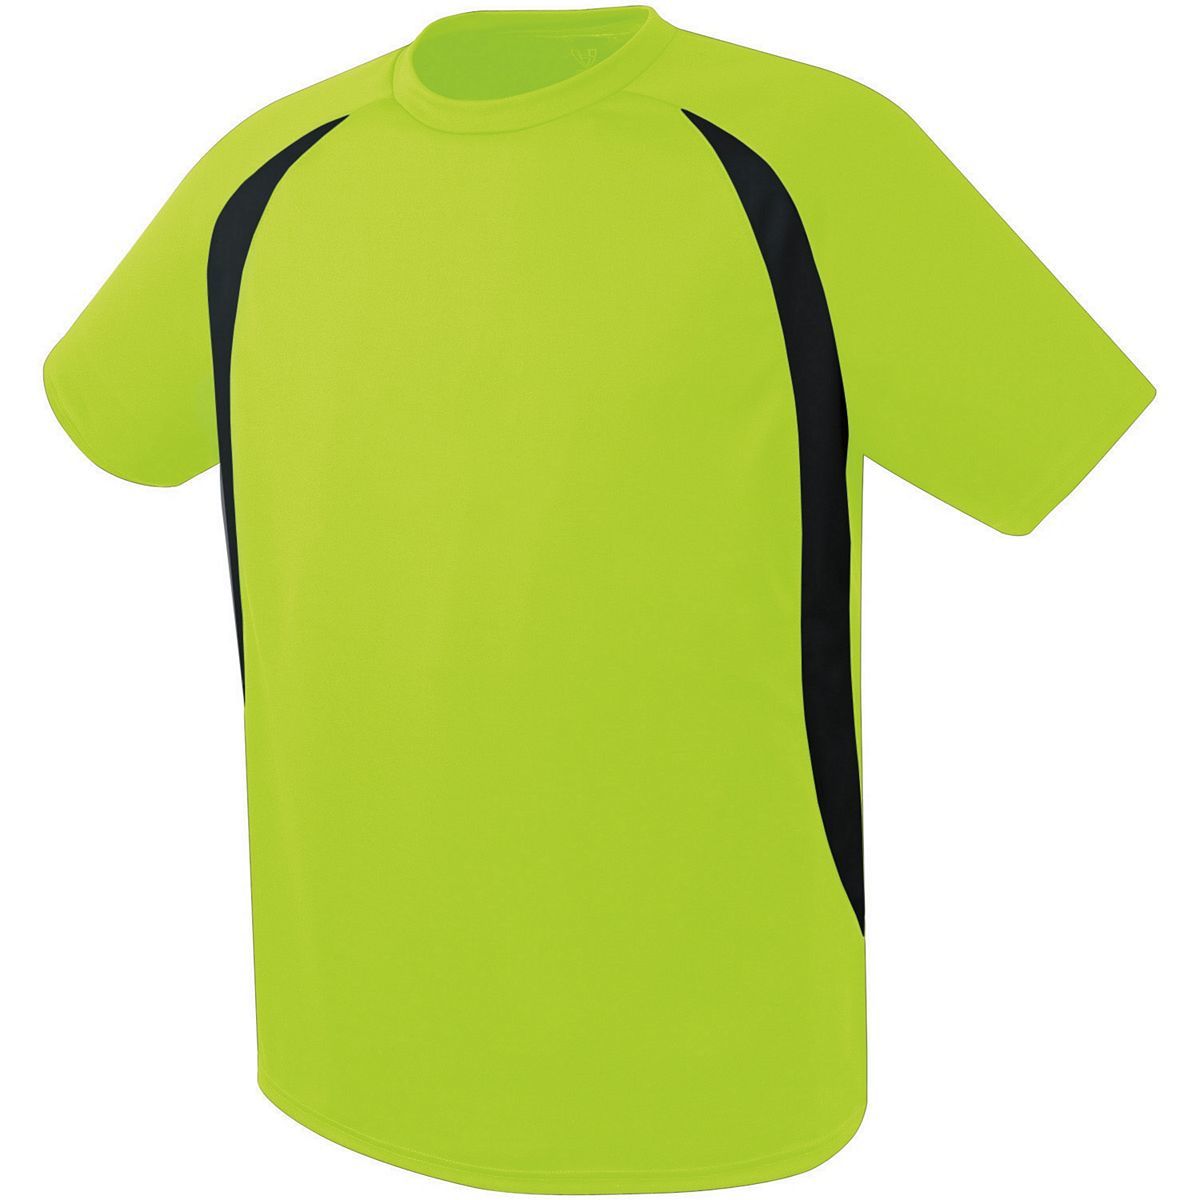 High 5 Youth Liberty Soccer Jersey in Lime/Black  -Part of the Youth, Youth-Jersey, High5-Products, Soccer, Shirts, All-Sports-1 product lines at KanaleyCreations.com